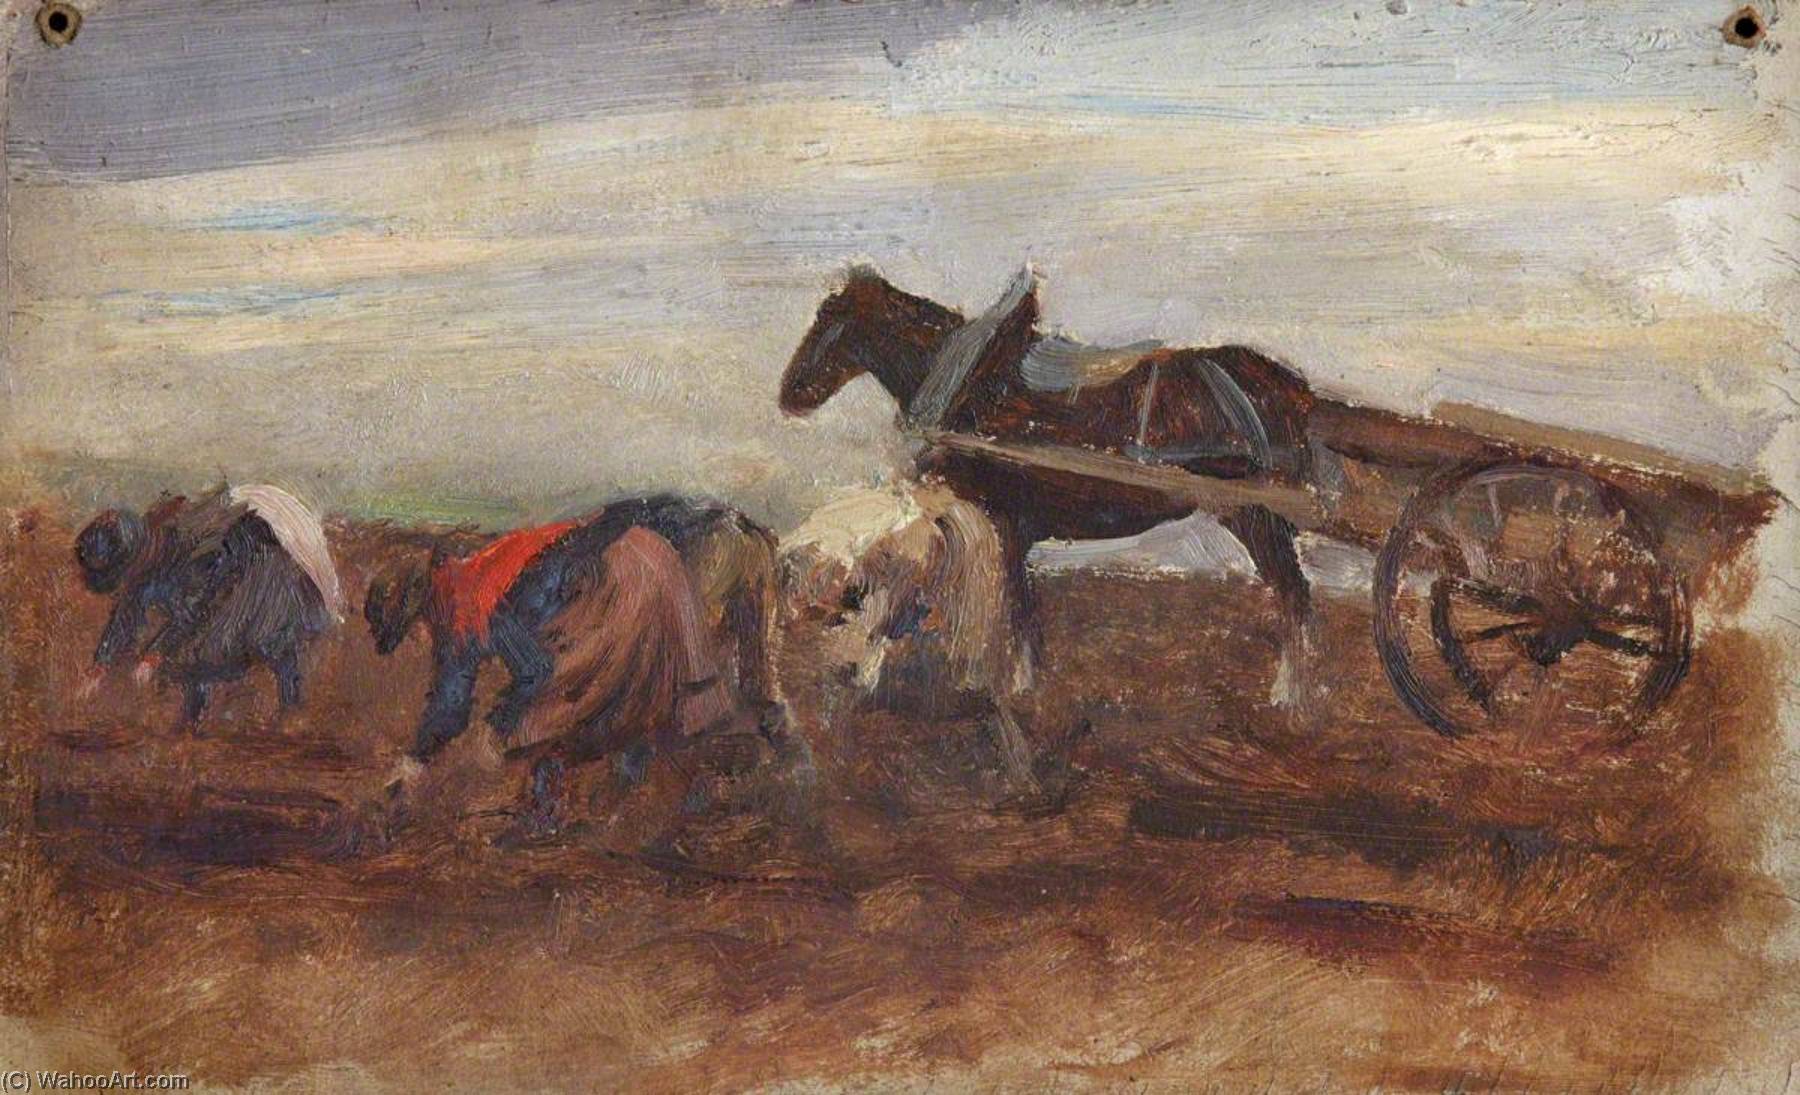 Order Oil Painting Replica Field Workers with Horse and Cart by William Darling Mckay (1844-1924) | ArtsDot.com